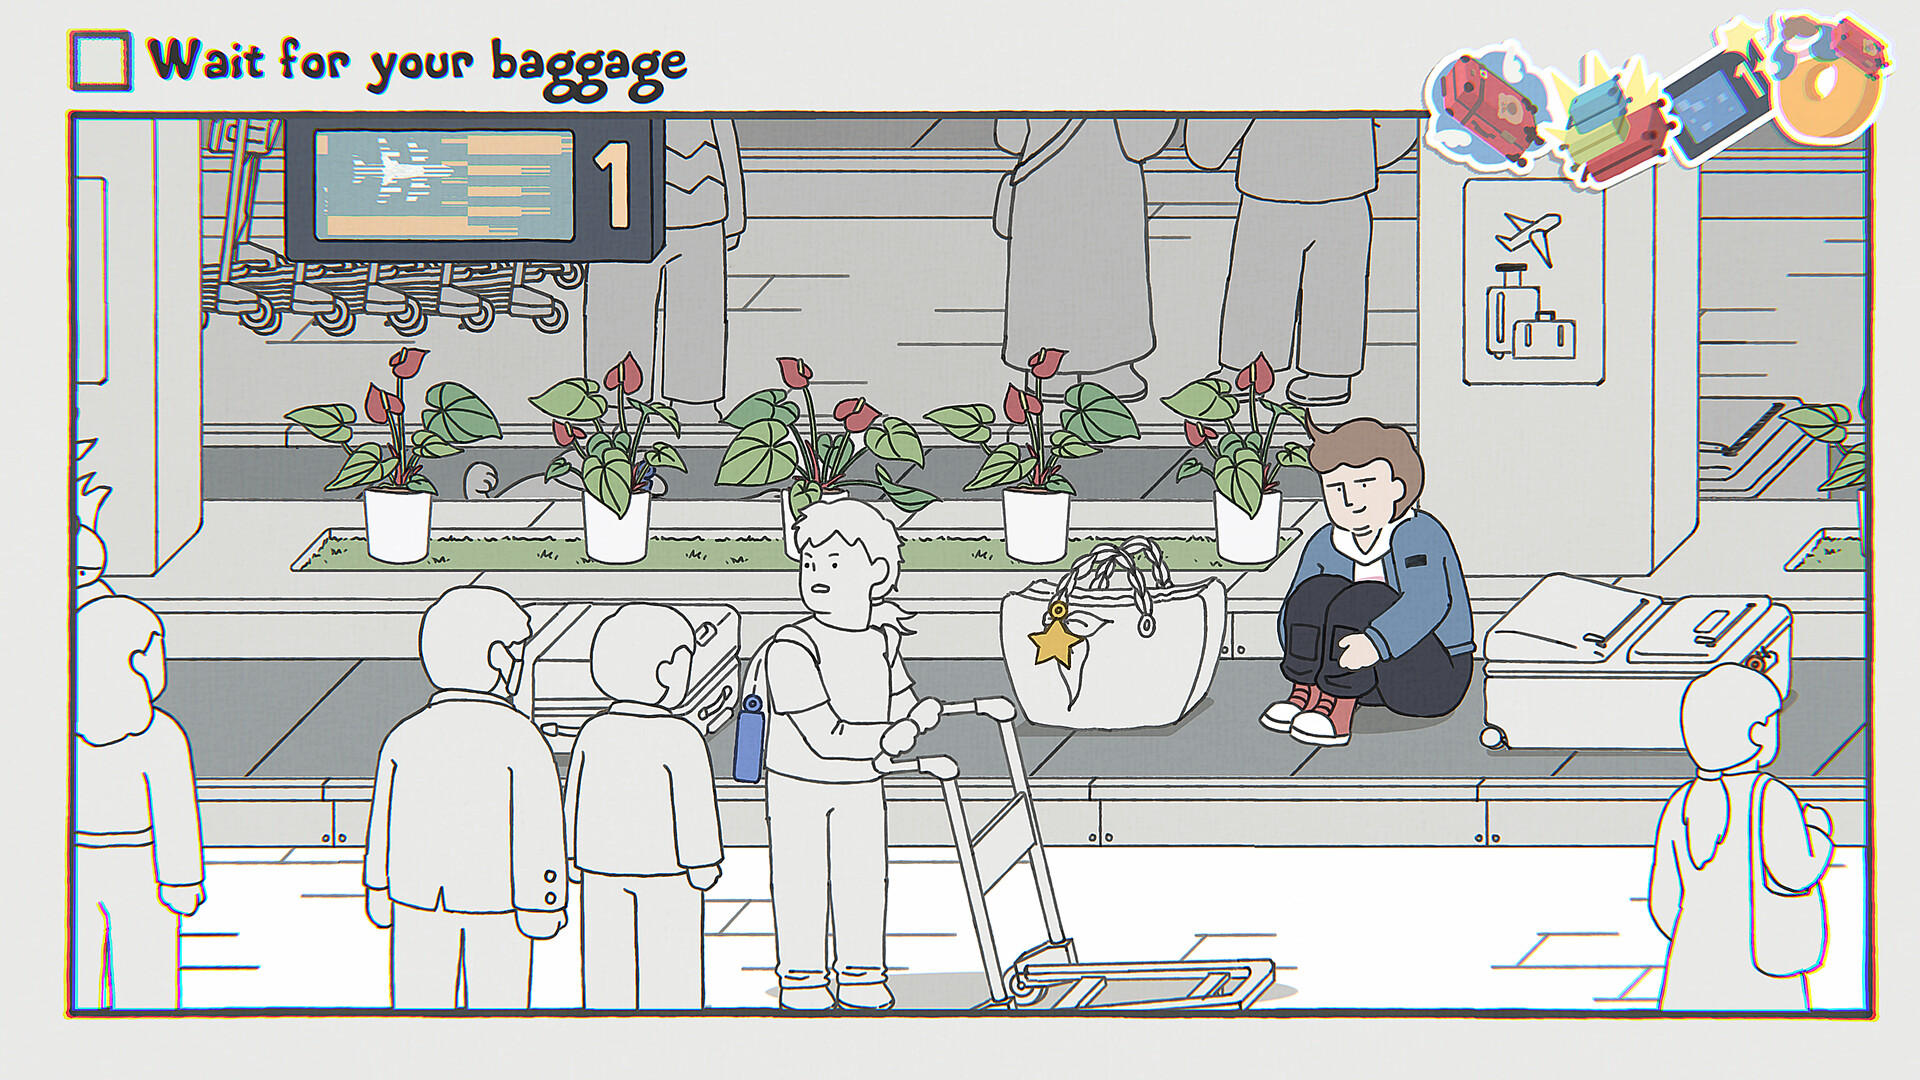 A screenshot from "While Waiting:" a character in a blue jacket smirks while riding the baggage carousel in an airport.